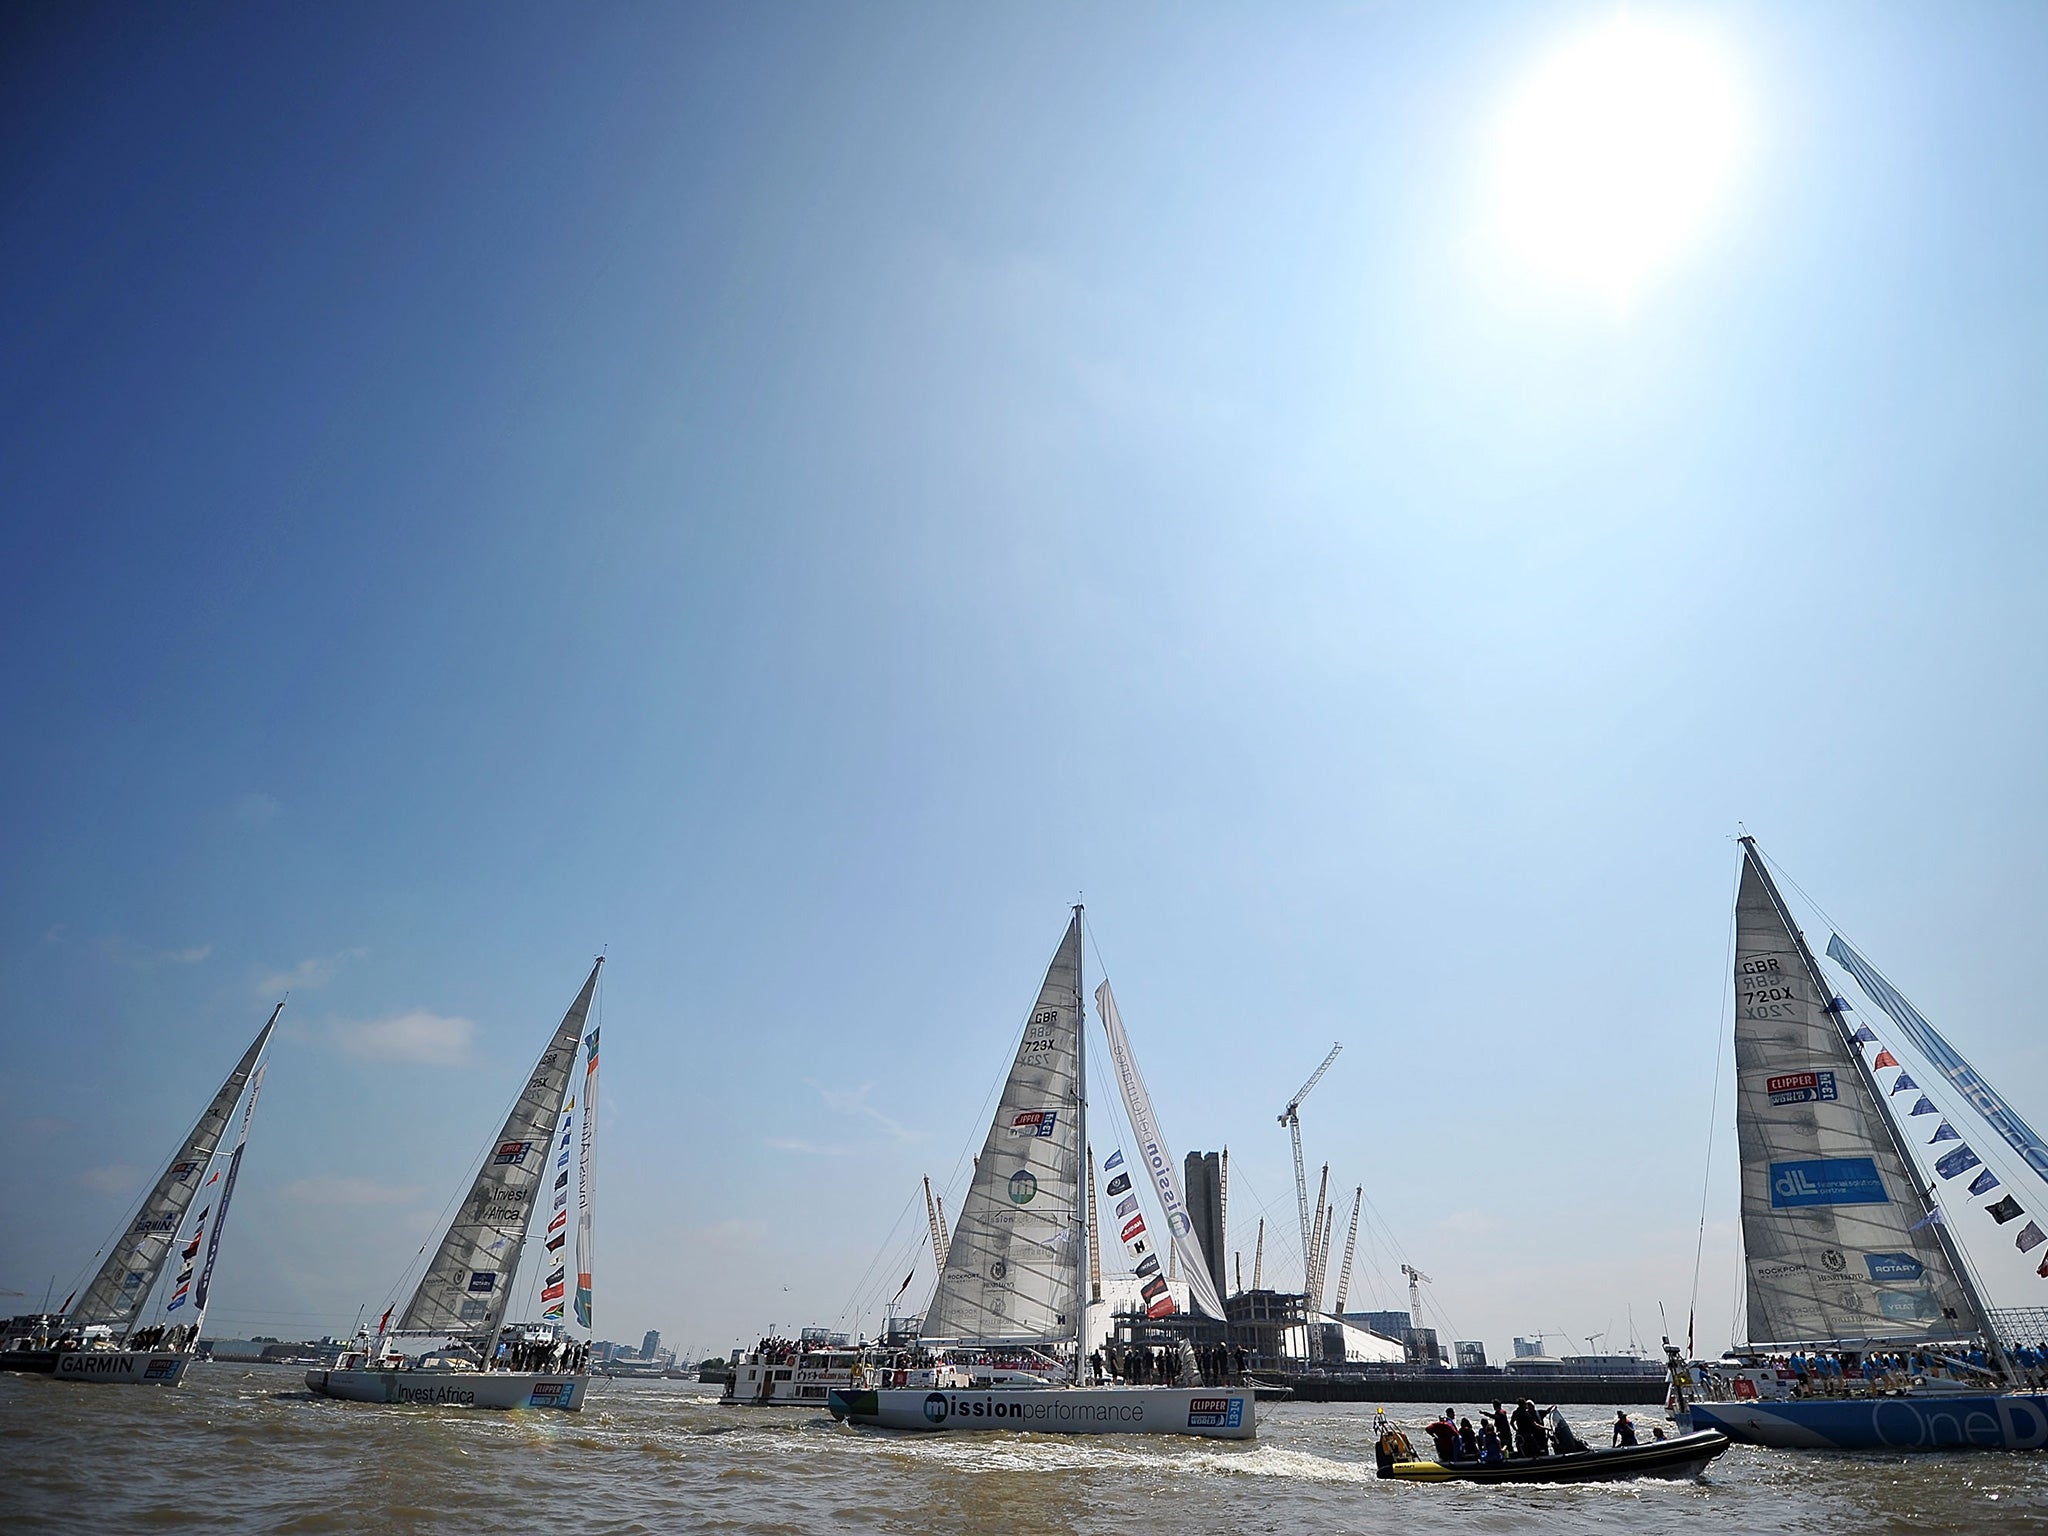 File photo shows a fleet of racing yachts. Three crews had to be rescued after they encountered hurricane force winds in the north Atlantic